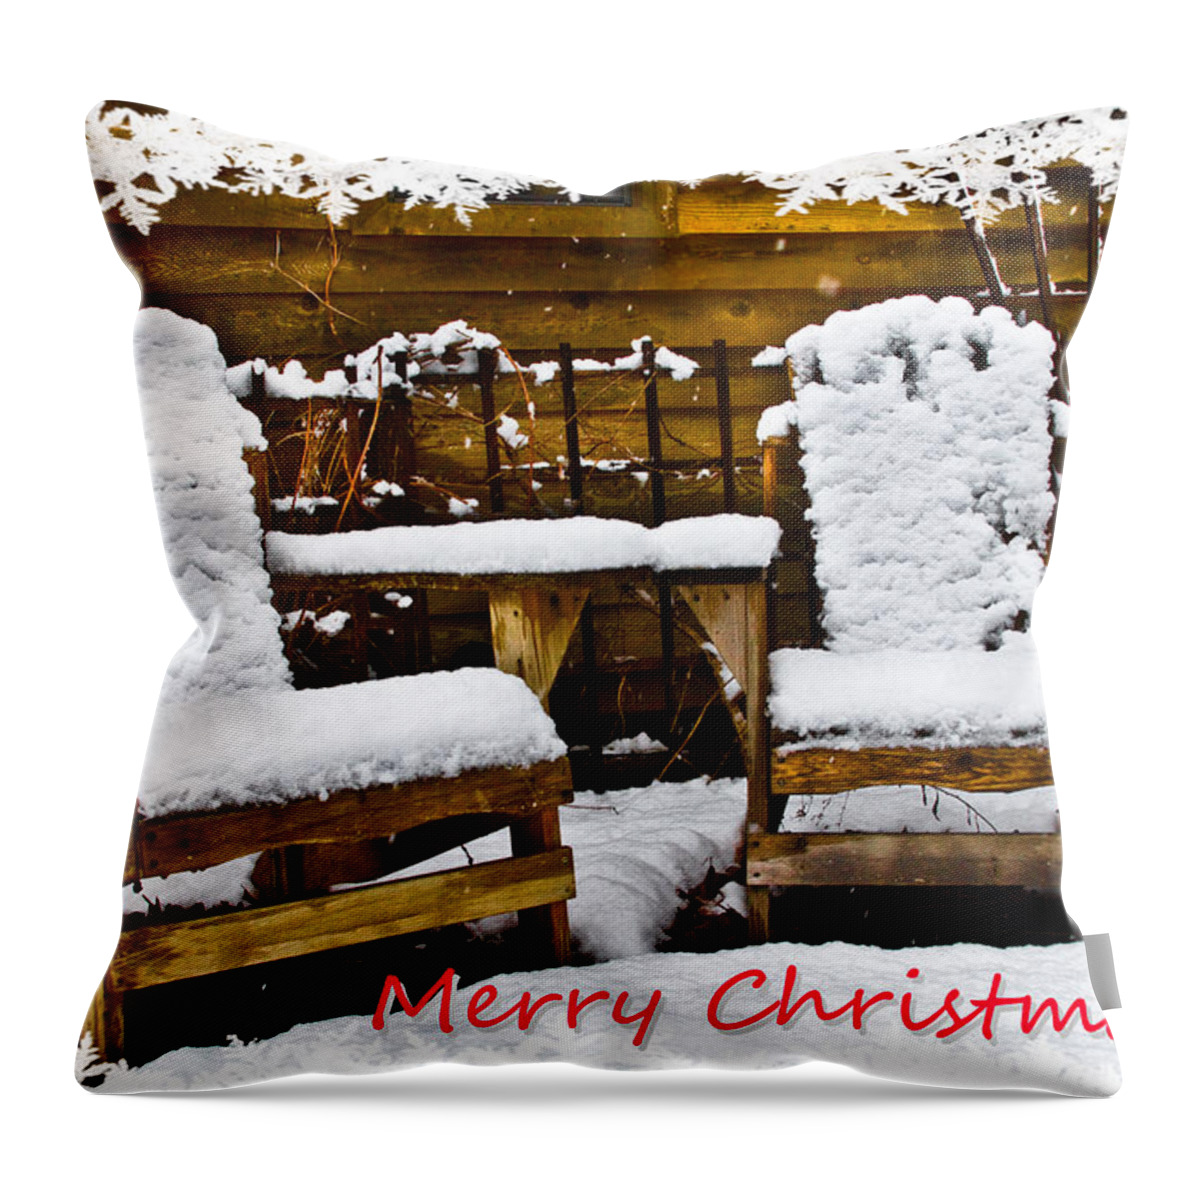 Appalachia Throw Pillow featuring the photograph Snowy Coffee Holiday Card by Debra and Dave Vanderlaan